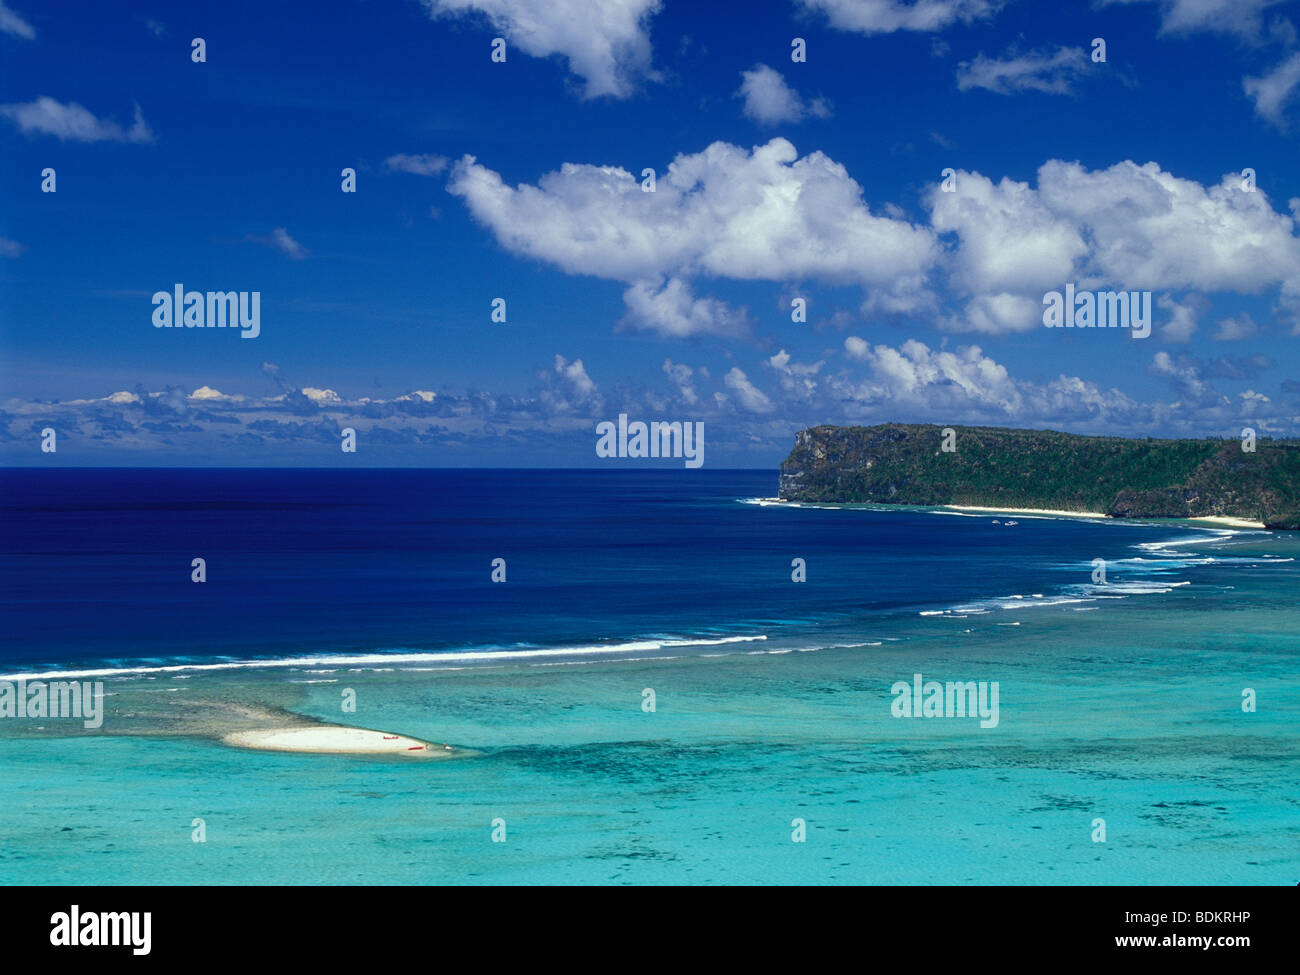 Tumon Bay with sandy islet and reef, Two Lovers Point in distance; Guam, Micronesia. Stock Photo